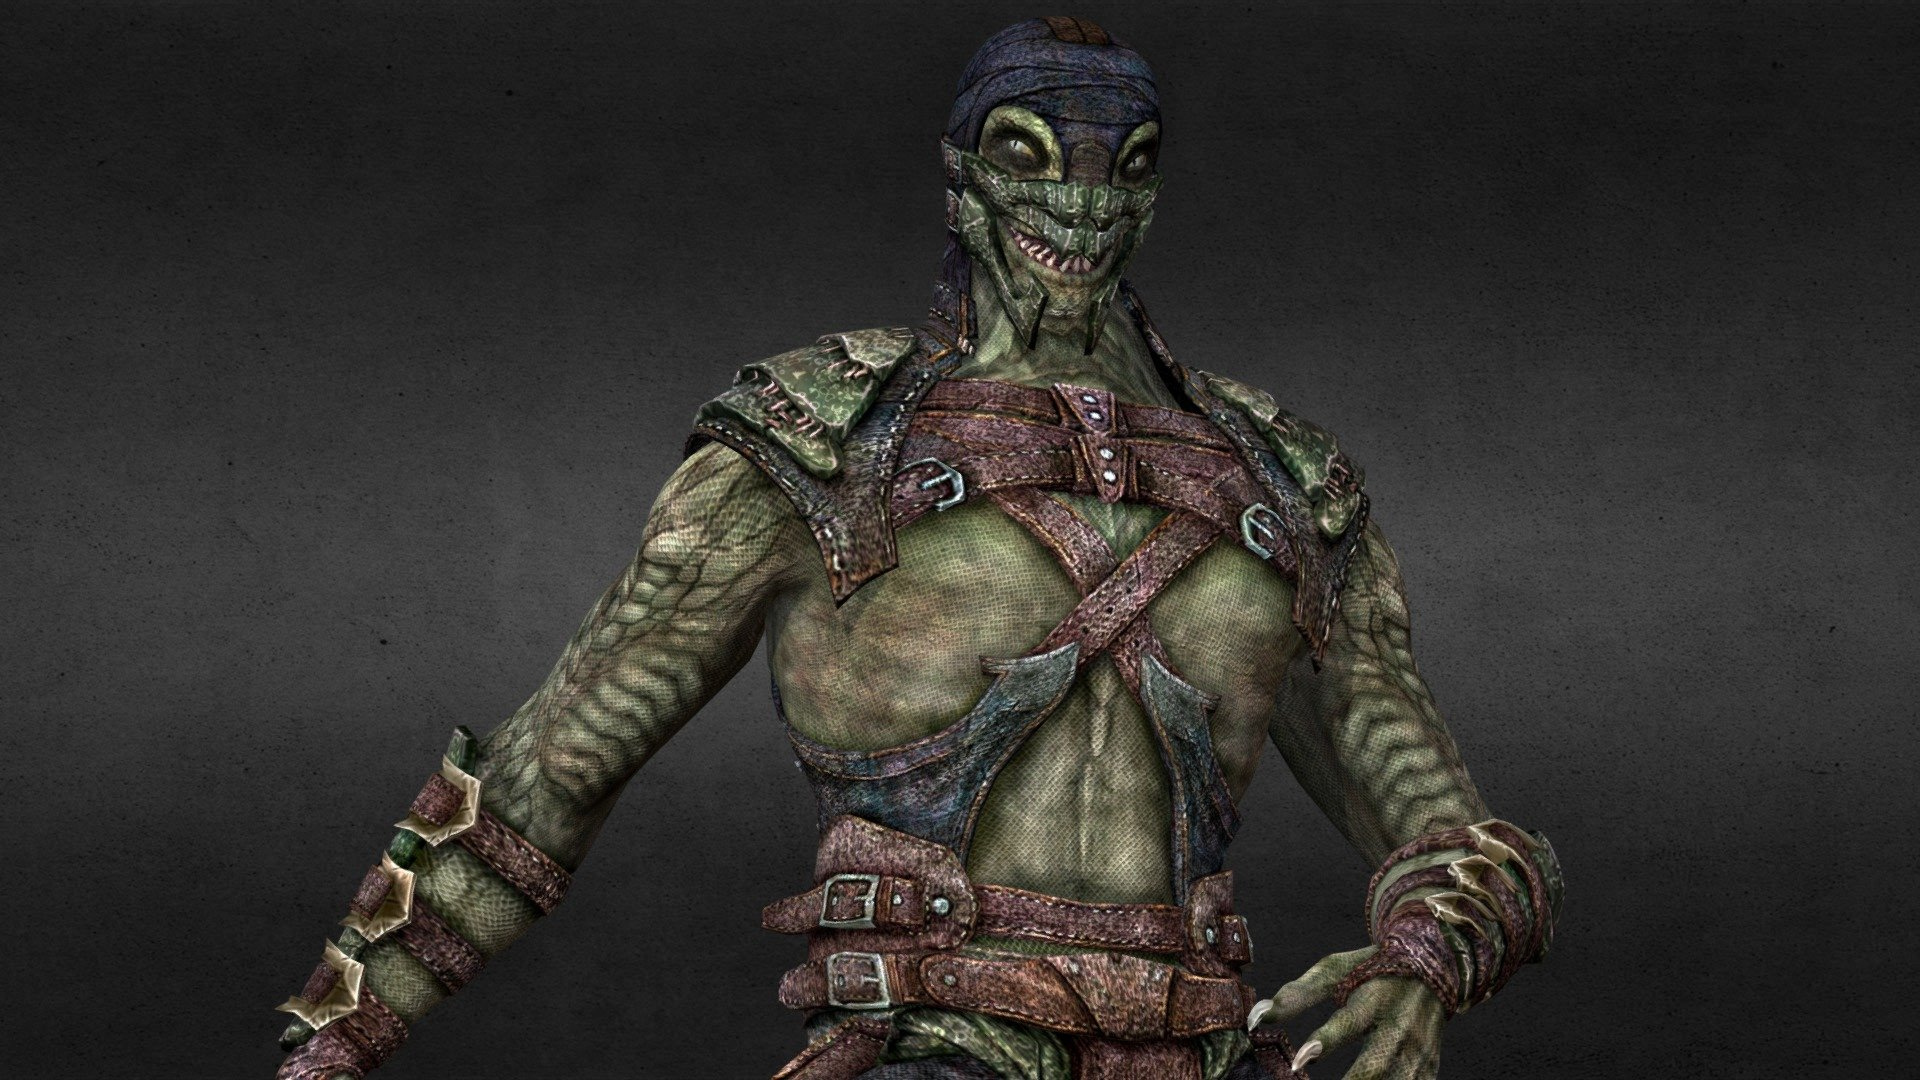 Repainted Reptile Tournament MKX Download Free 3D Model By Judge arts